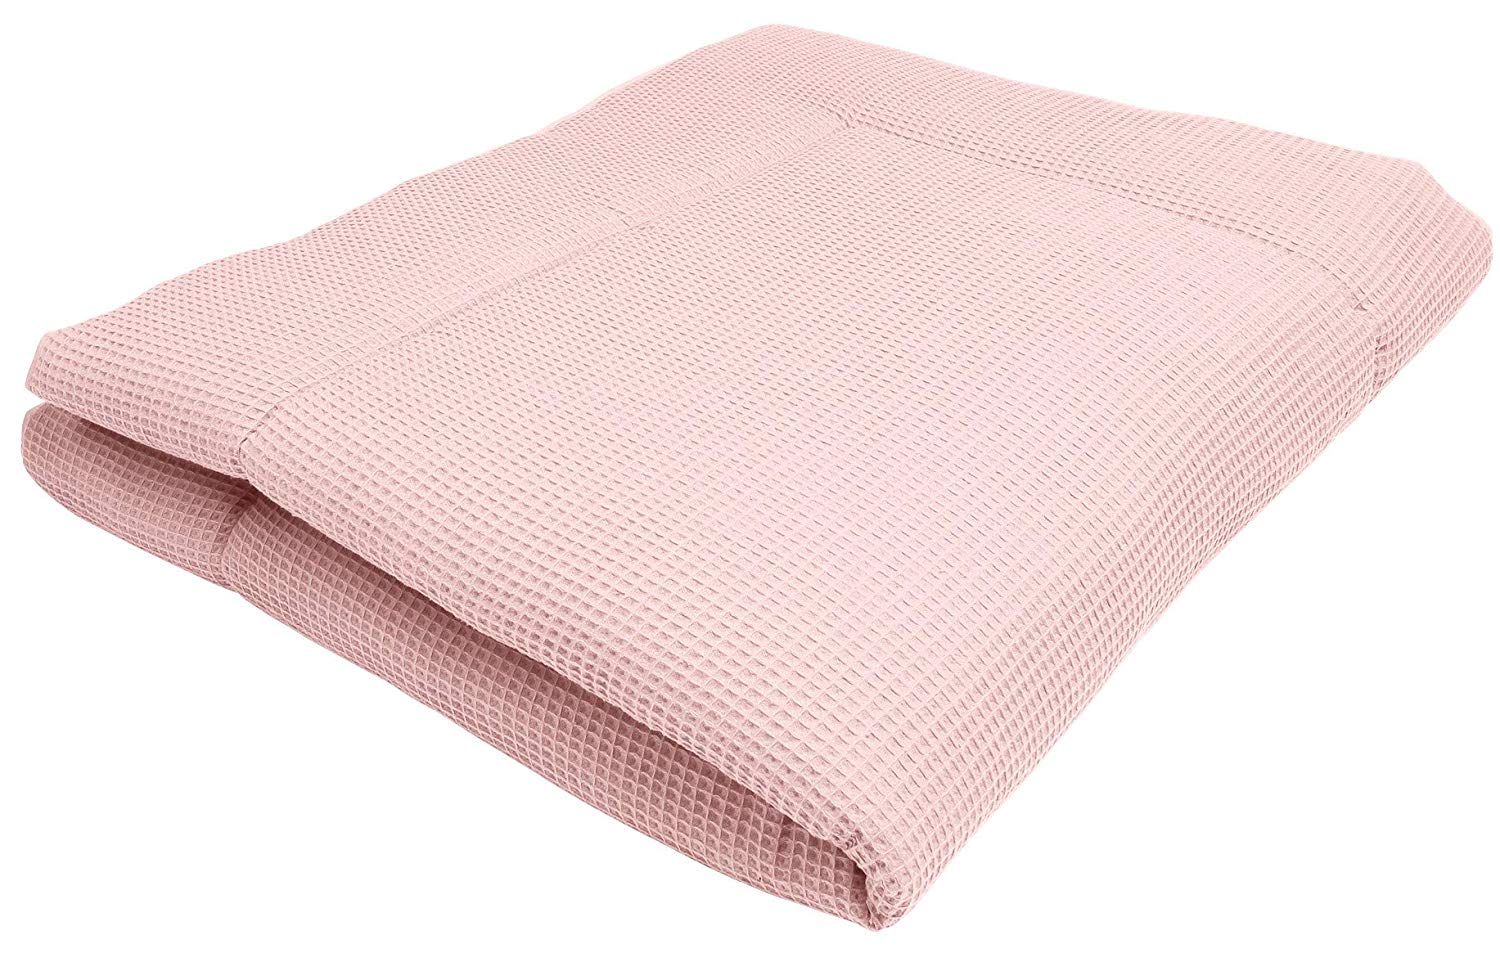 Ideenreich Ideenreich 2481 Baby Crawling Blanket King Size 135 x 150 cm Ideal as Play Mat and Playpen Insert Pink